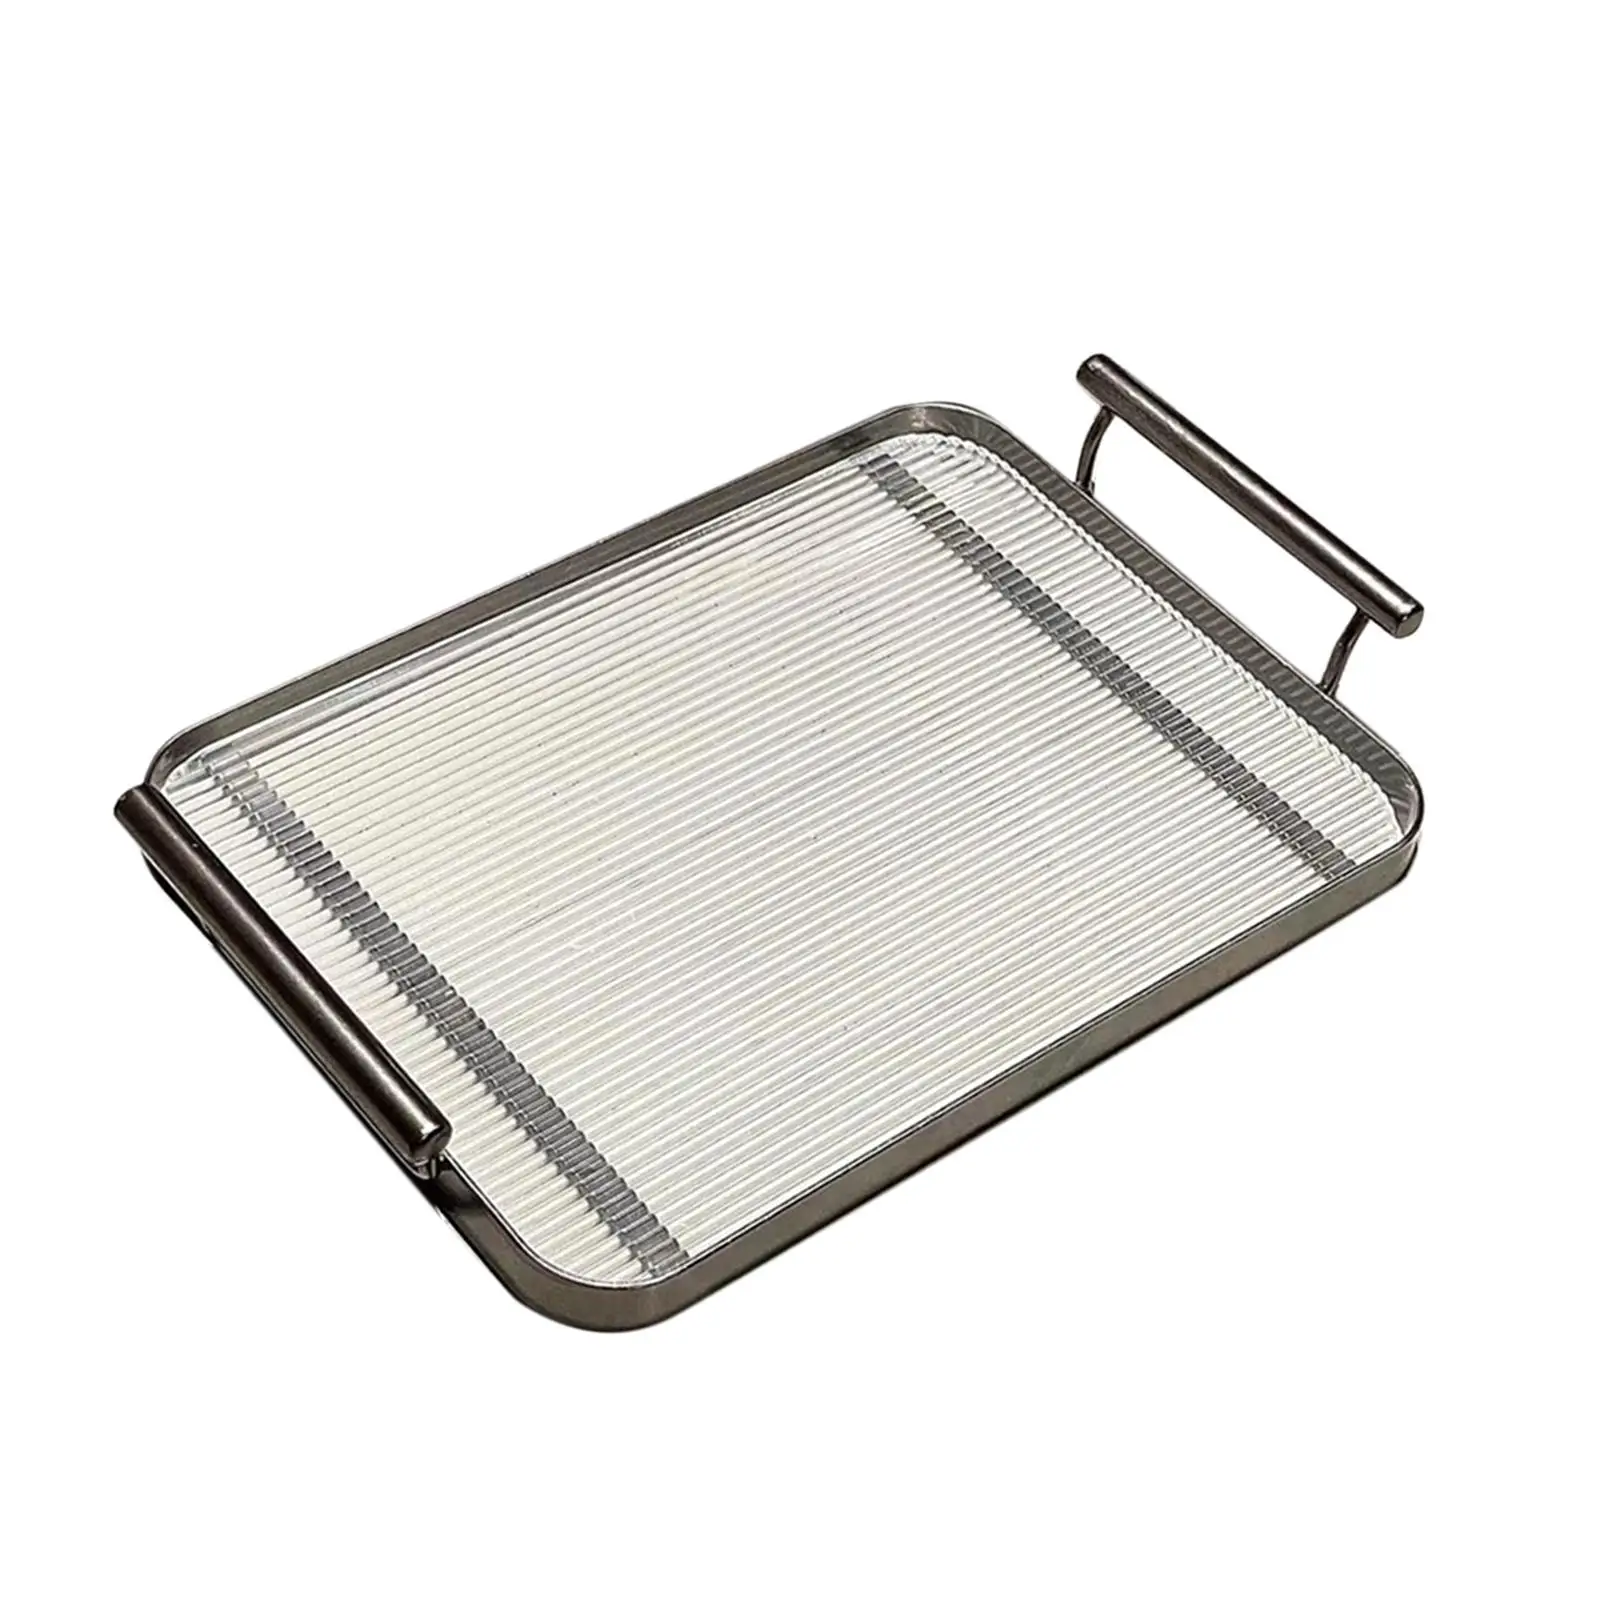 Acrylic Serving Tray with Handles Versatile Fruit Dessert Tray Durable Makeup Tray for Office Meals Snacks Party Bathroom Vanity